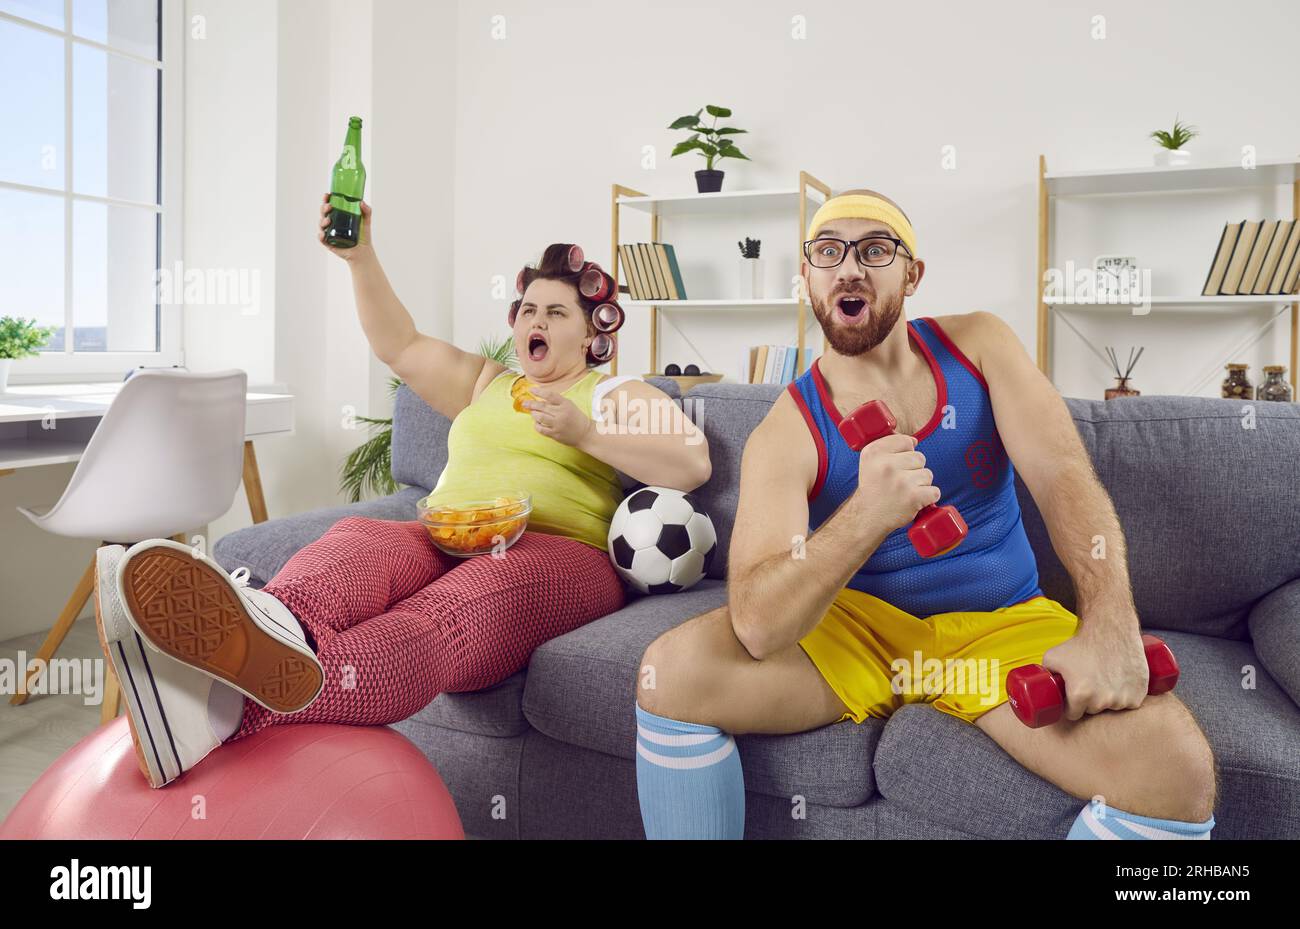 Funny fat woman with food and beer and fit man with dumbbell watching football on TV Stock Photo